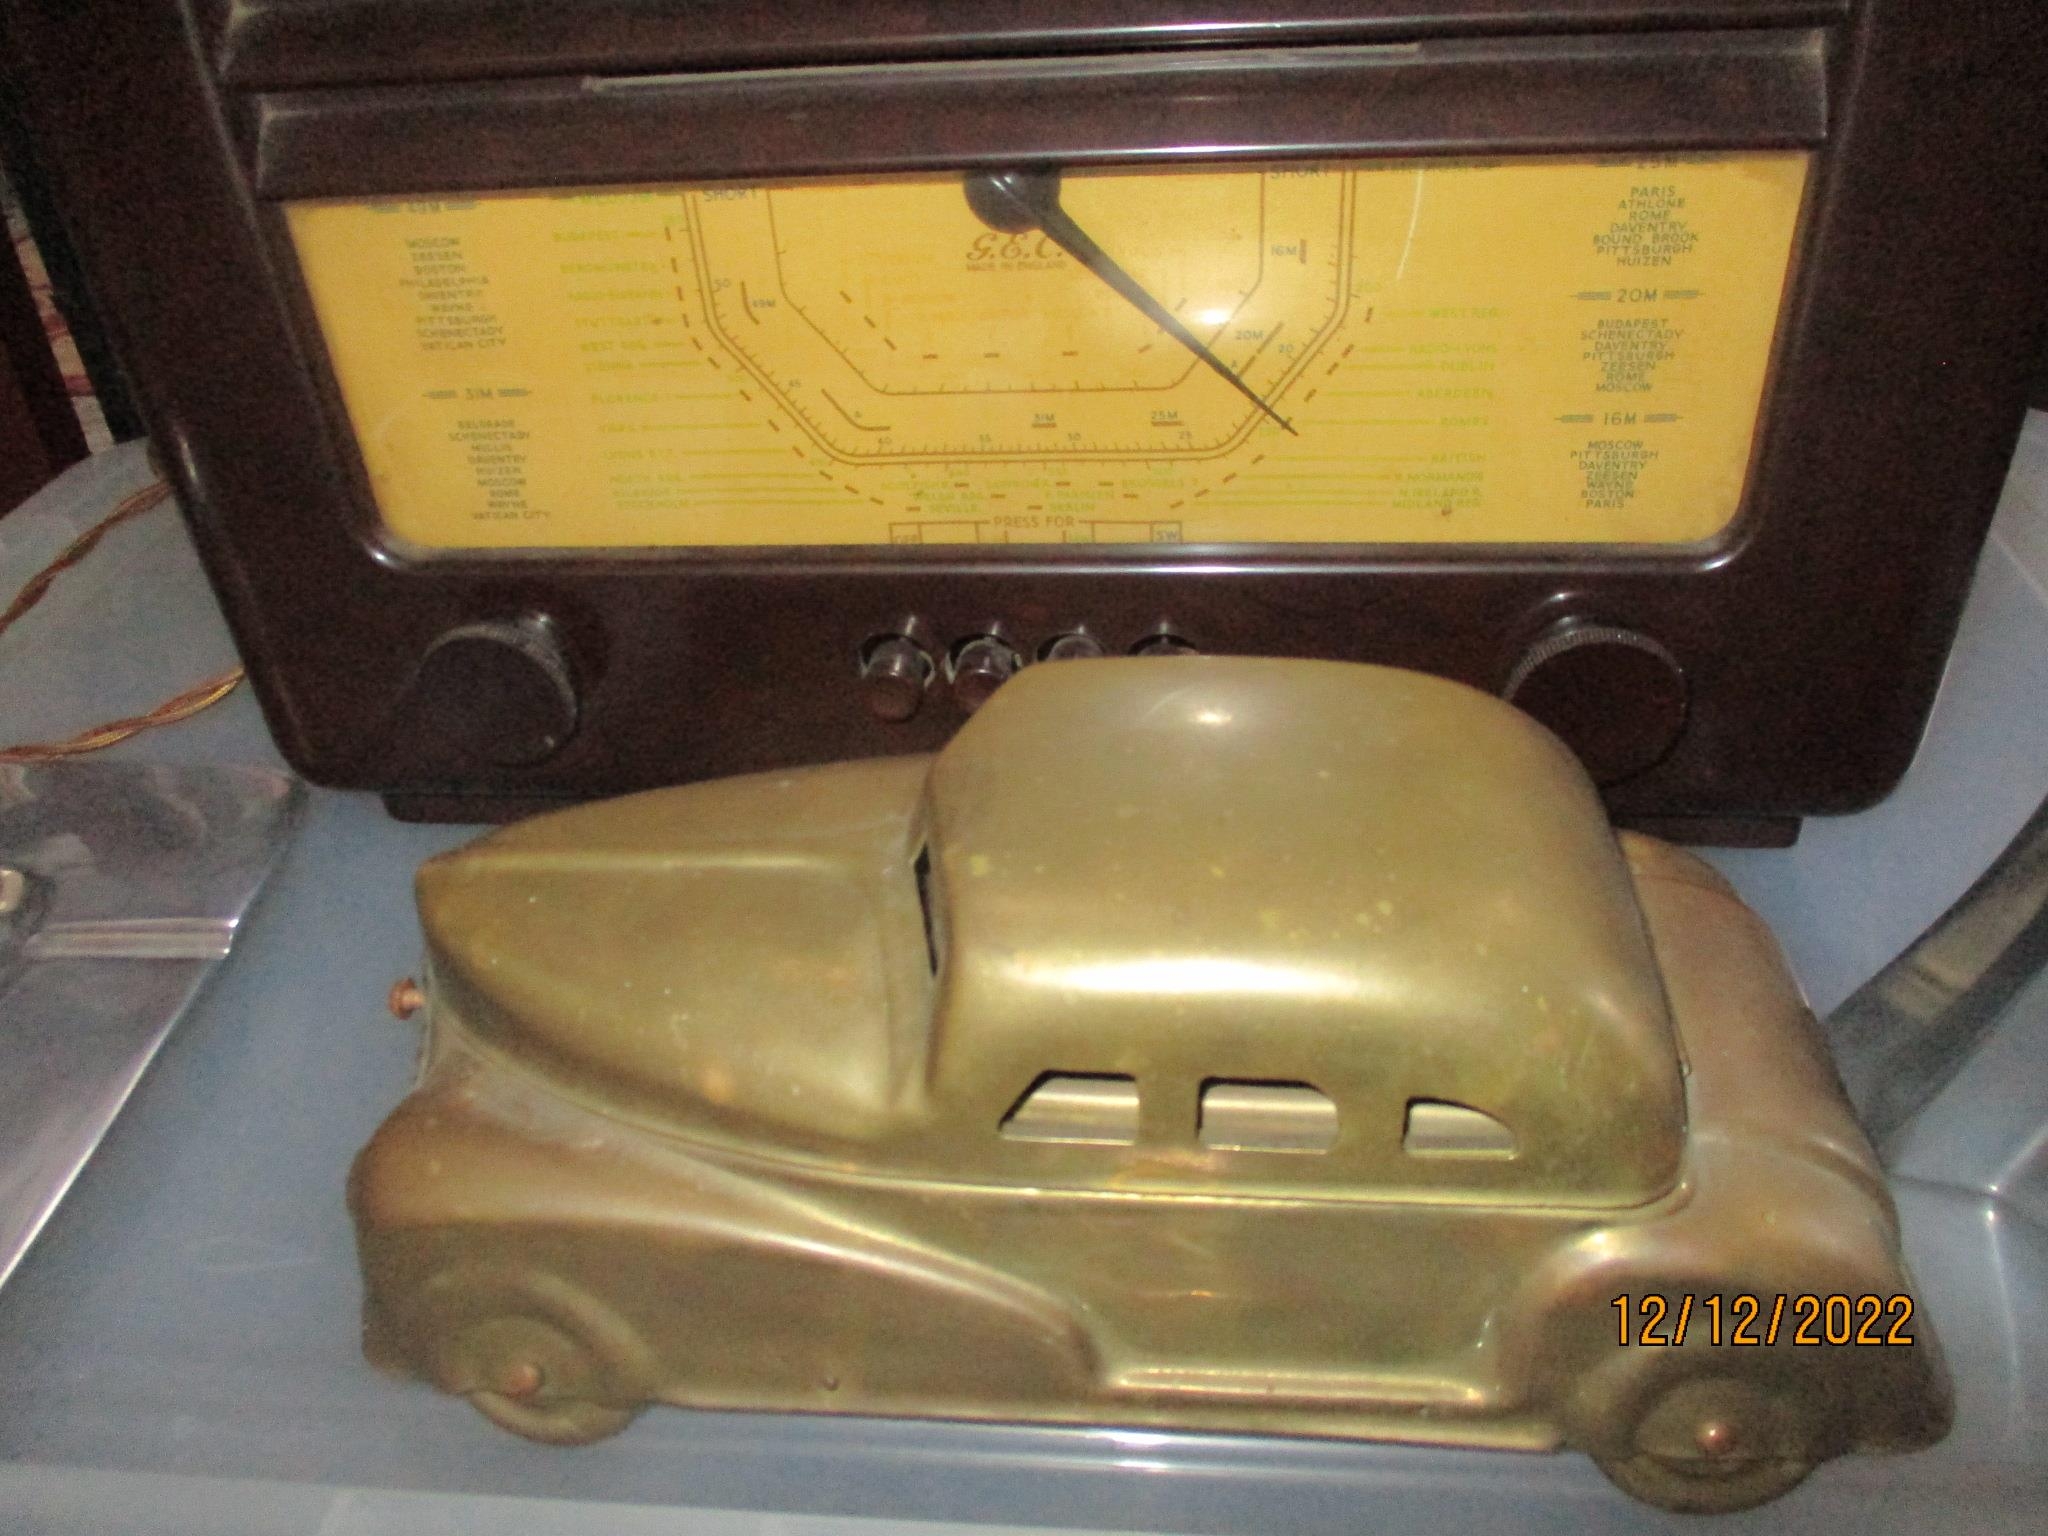 A General Electric Company (GEC) Bakelite cased radio, a Fossil American classic alarm clock, - Image 7 of 8